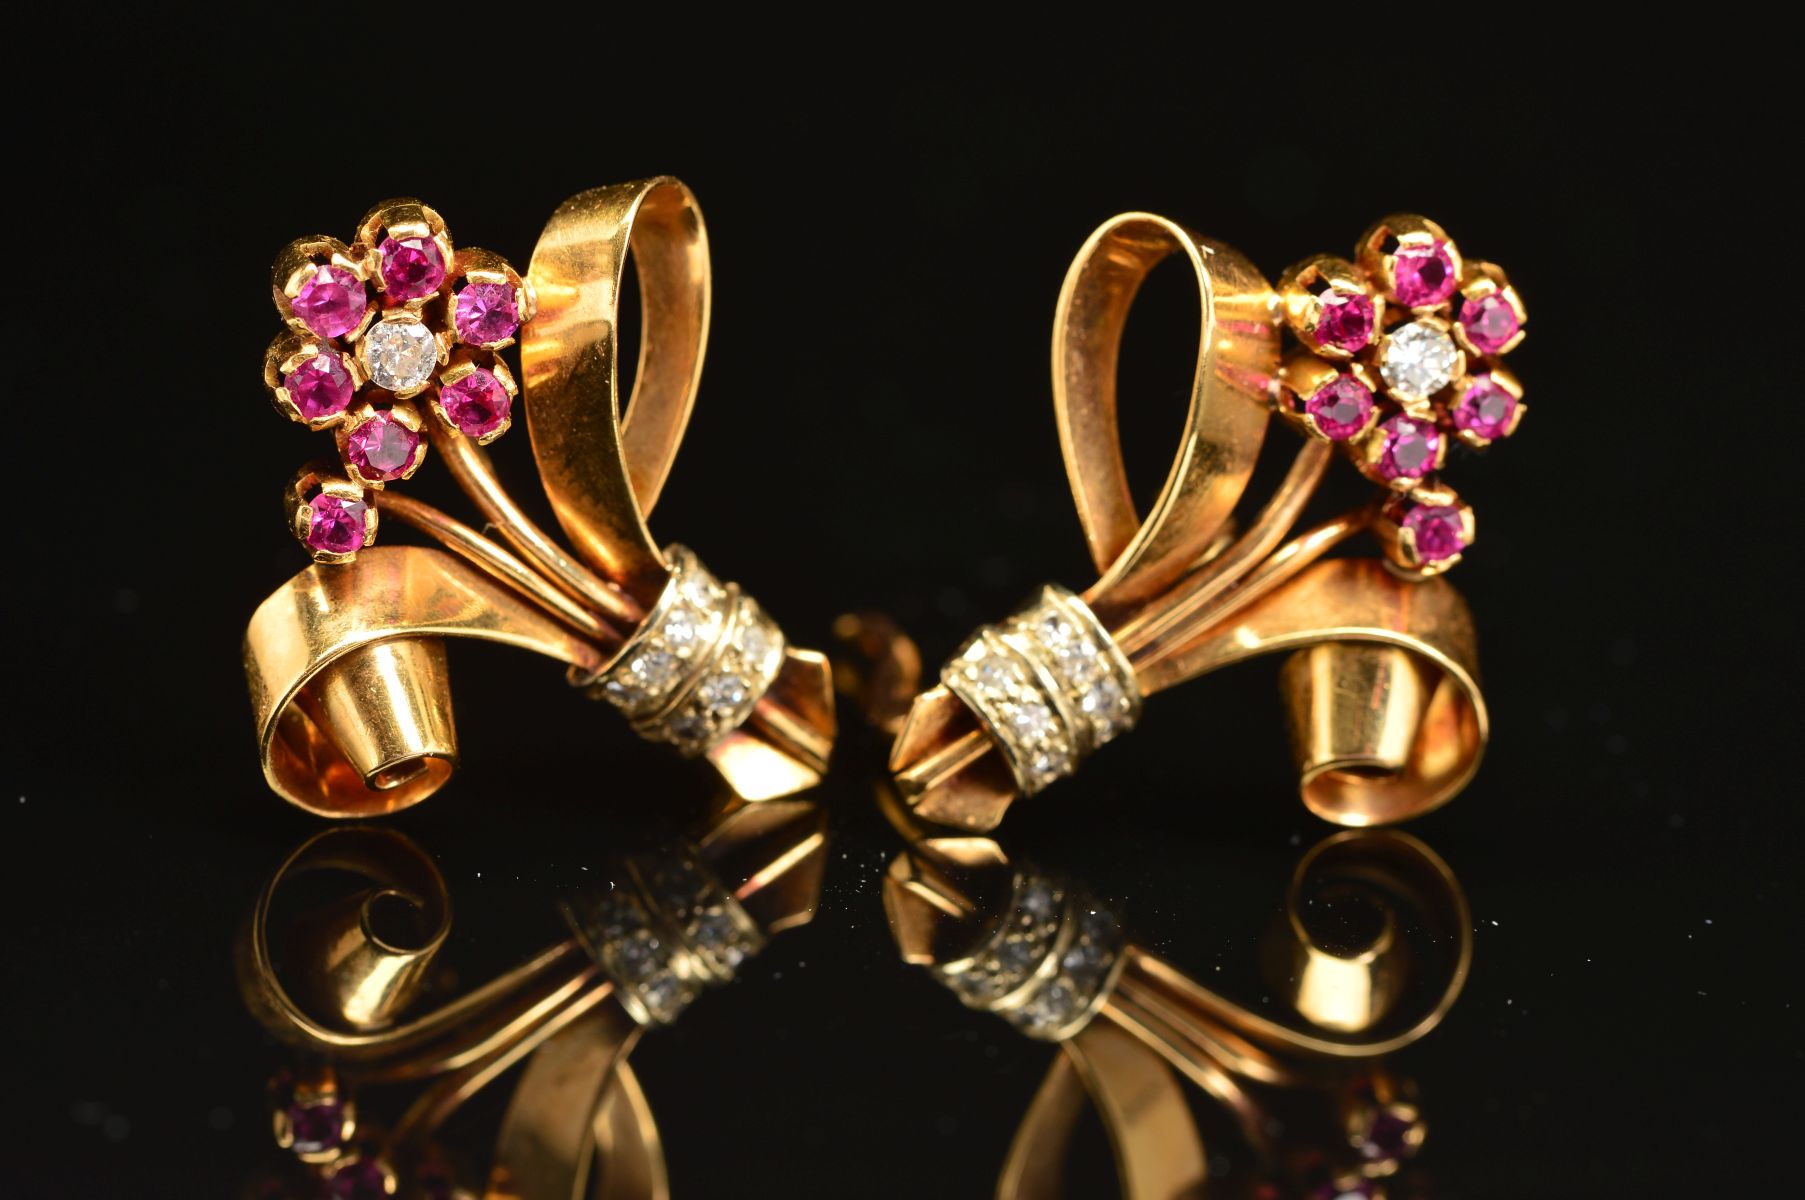 A MID 20TH CENTURY PAIR OF RUBY AND DIAMOND EARRINGS, floral design with scroll detail, measuring